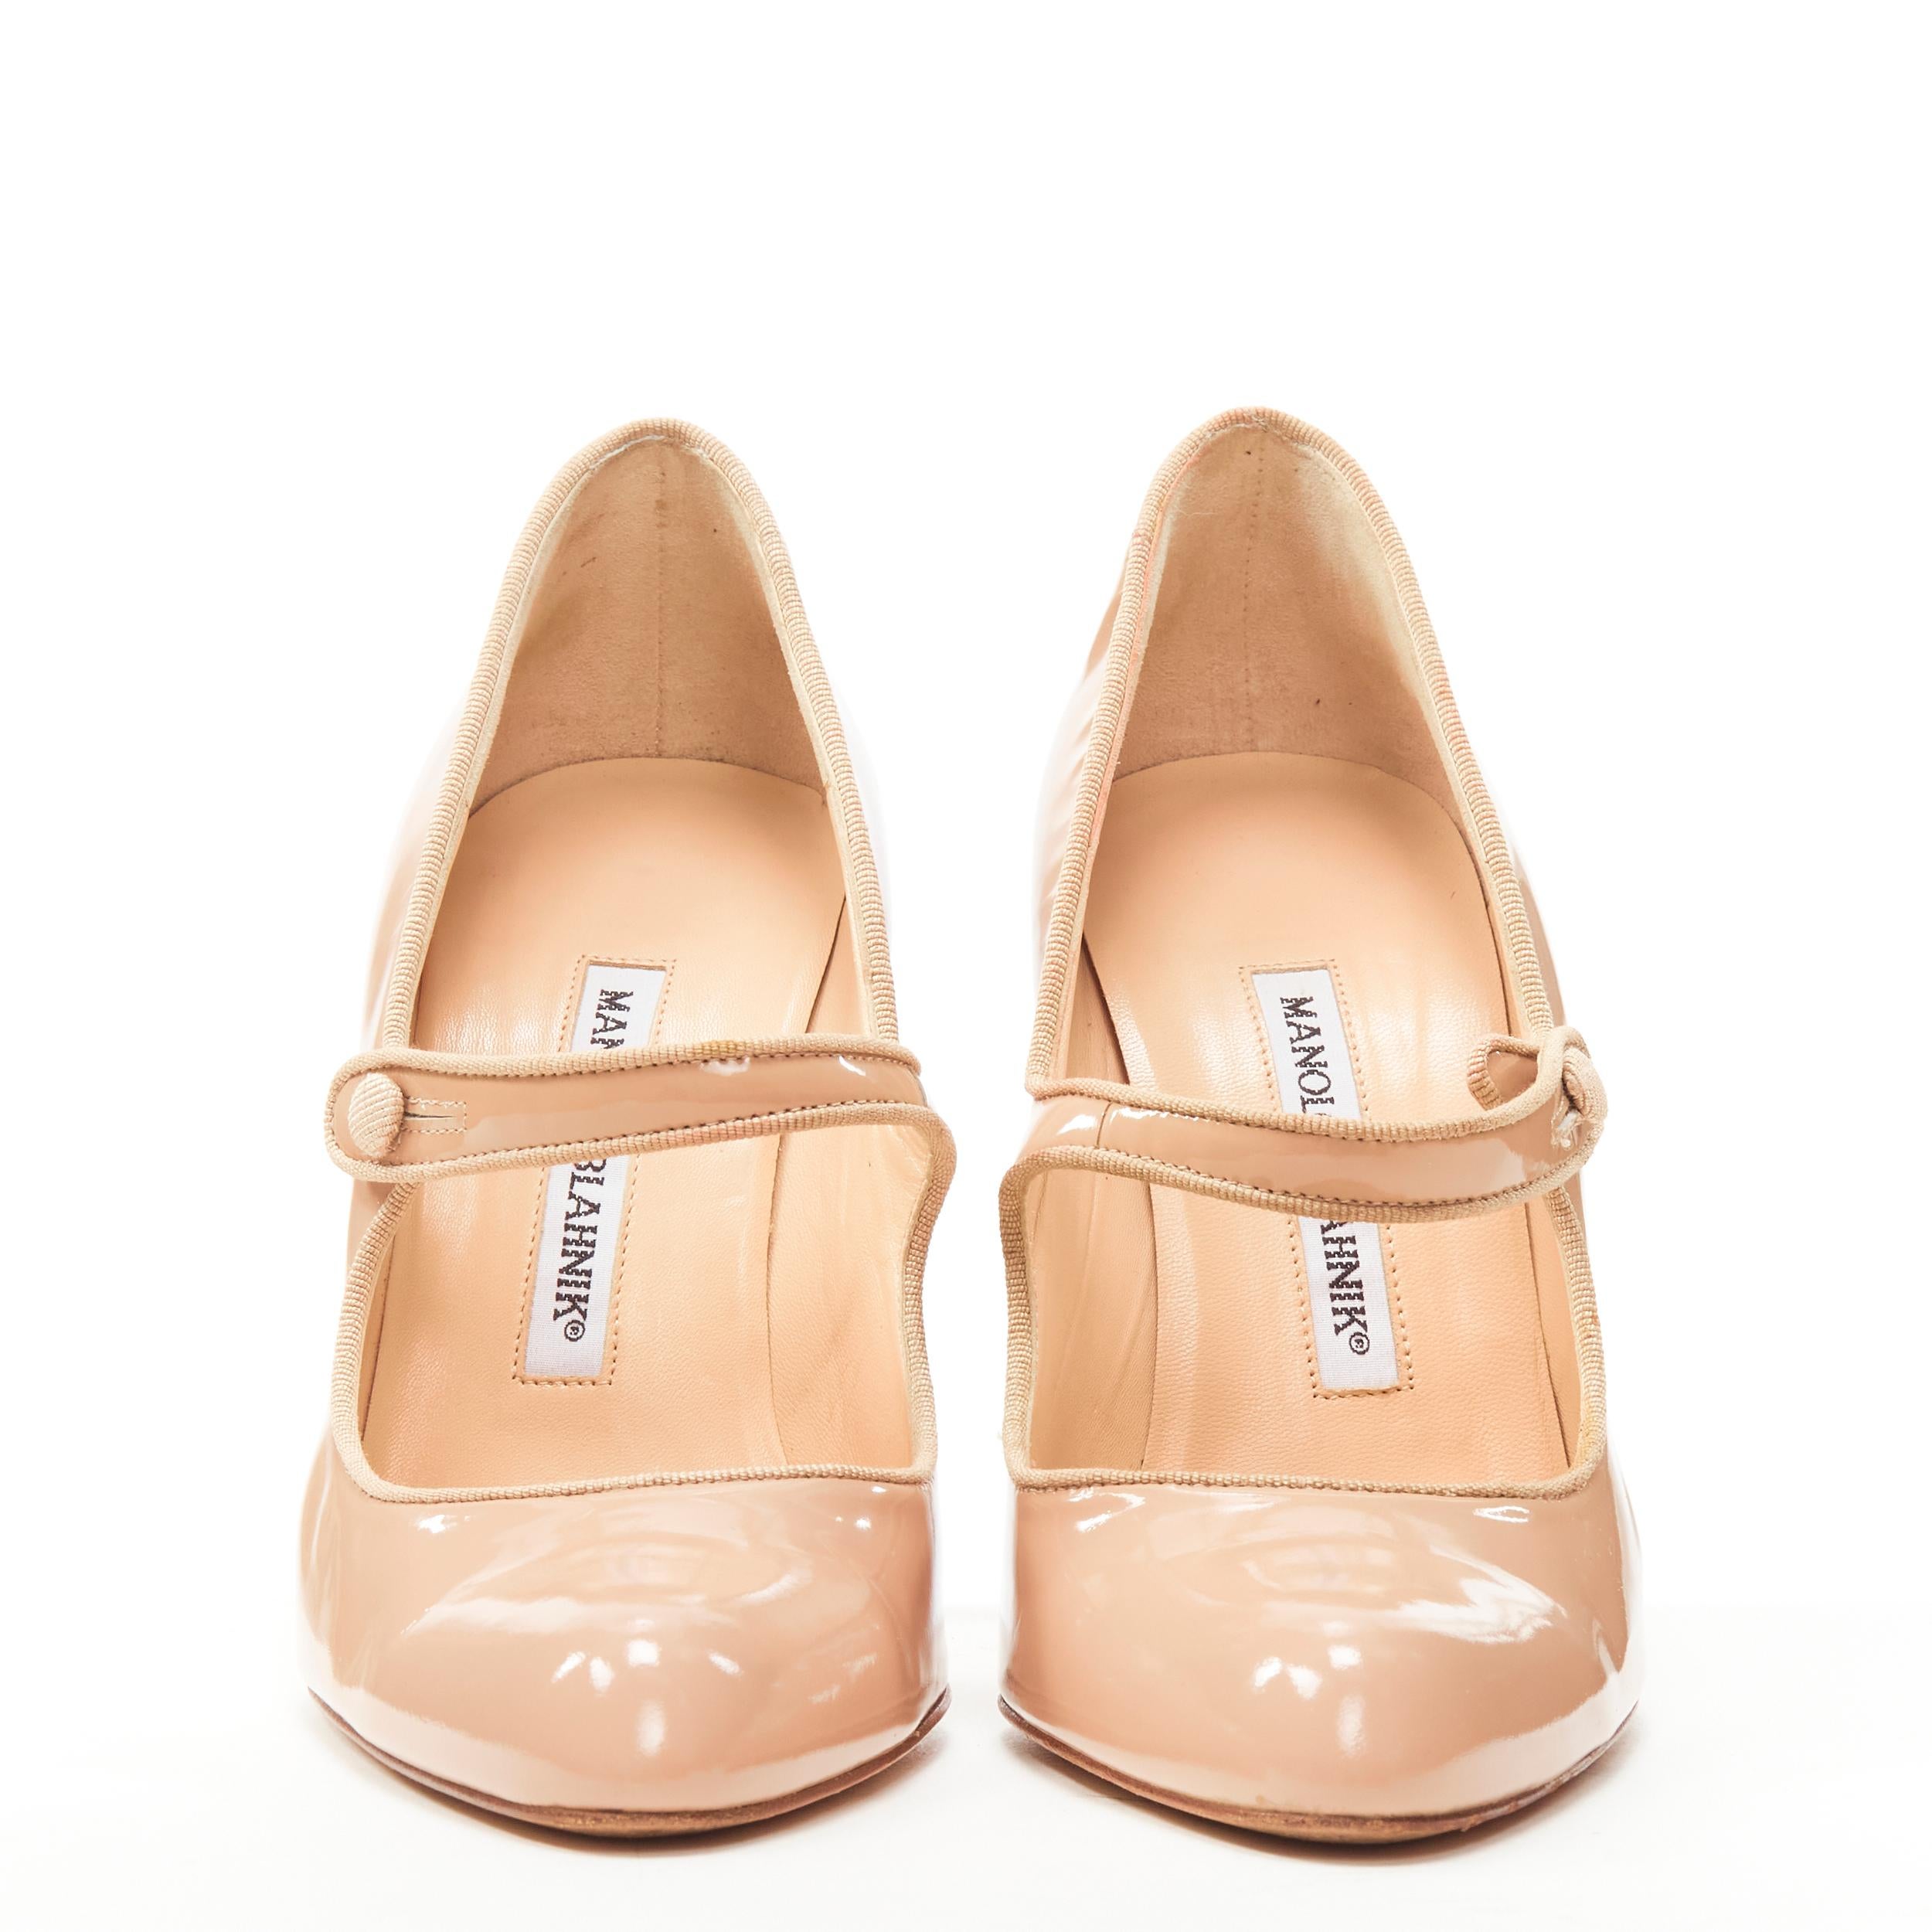 nude mary jane pumps